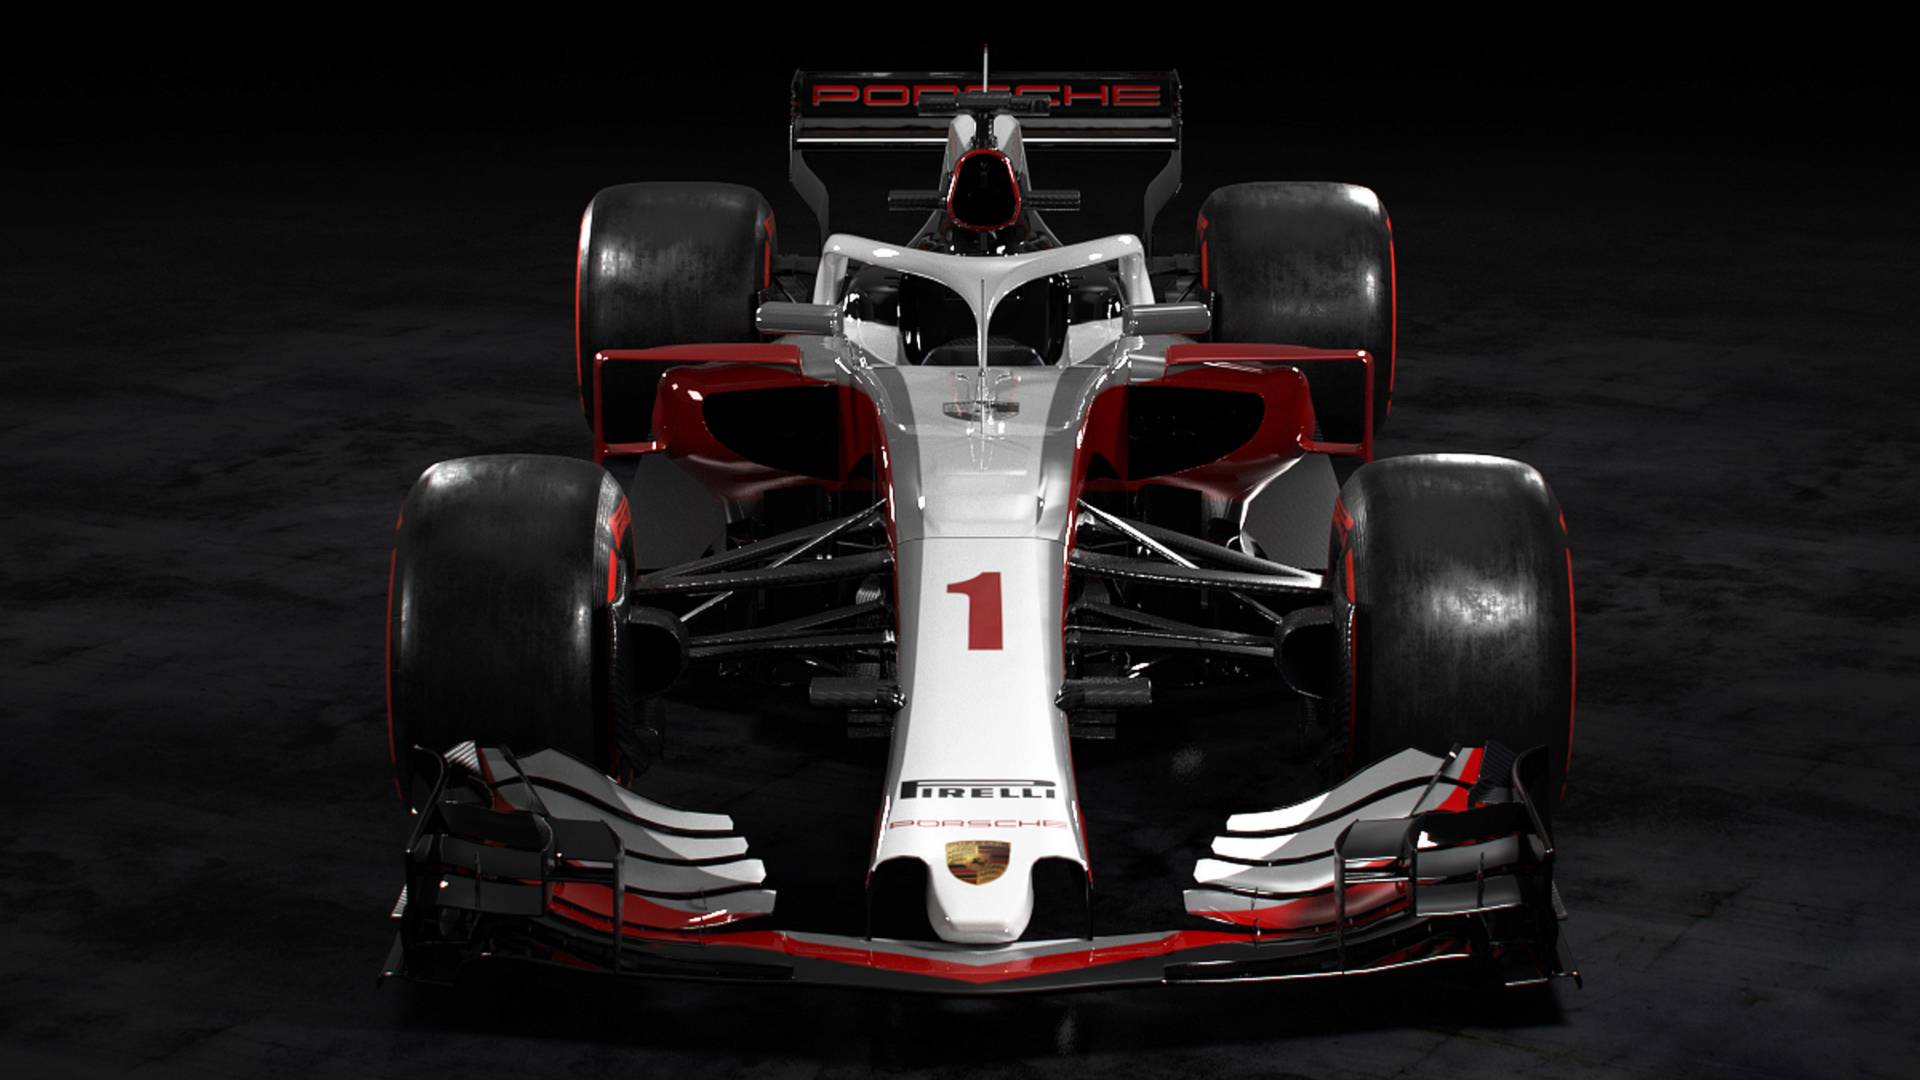 Porsche F1 Return In The Works For 2025 Boss Hunting